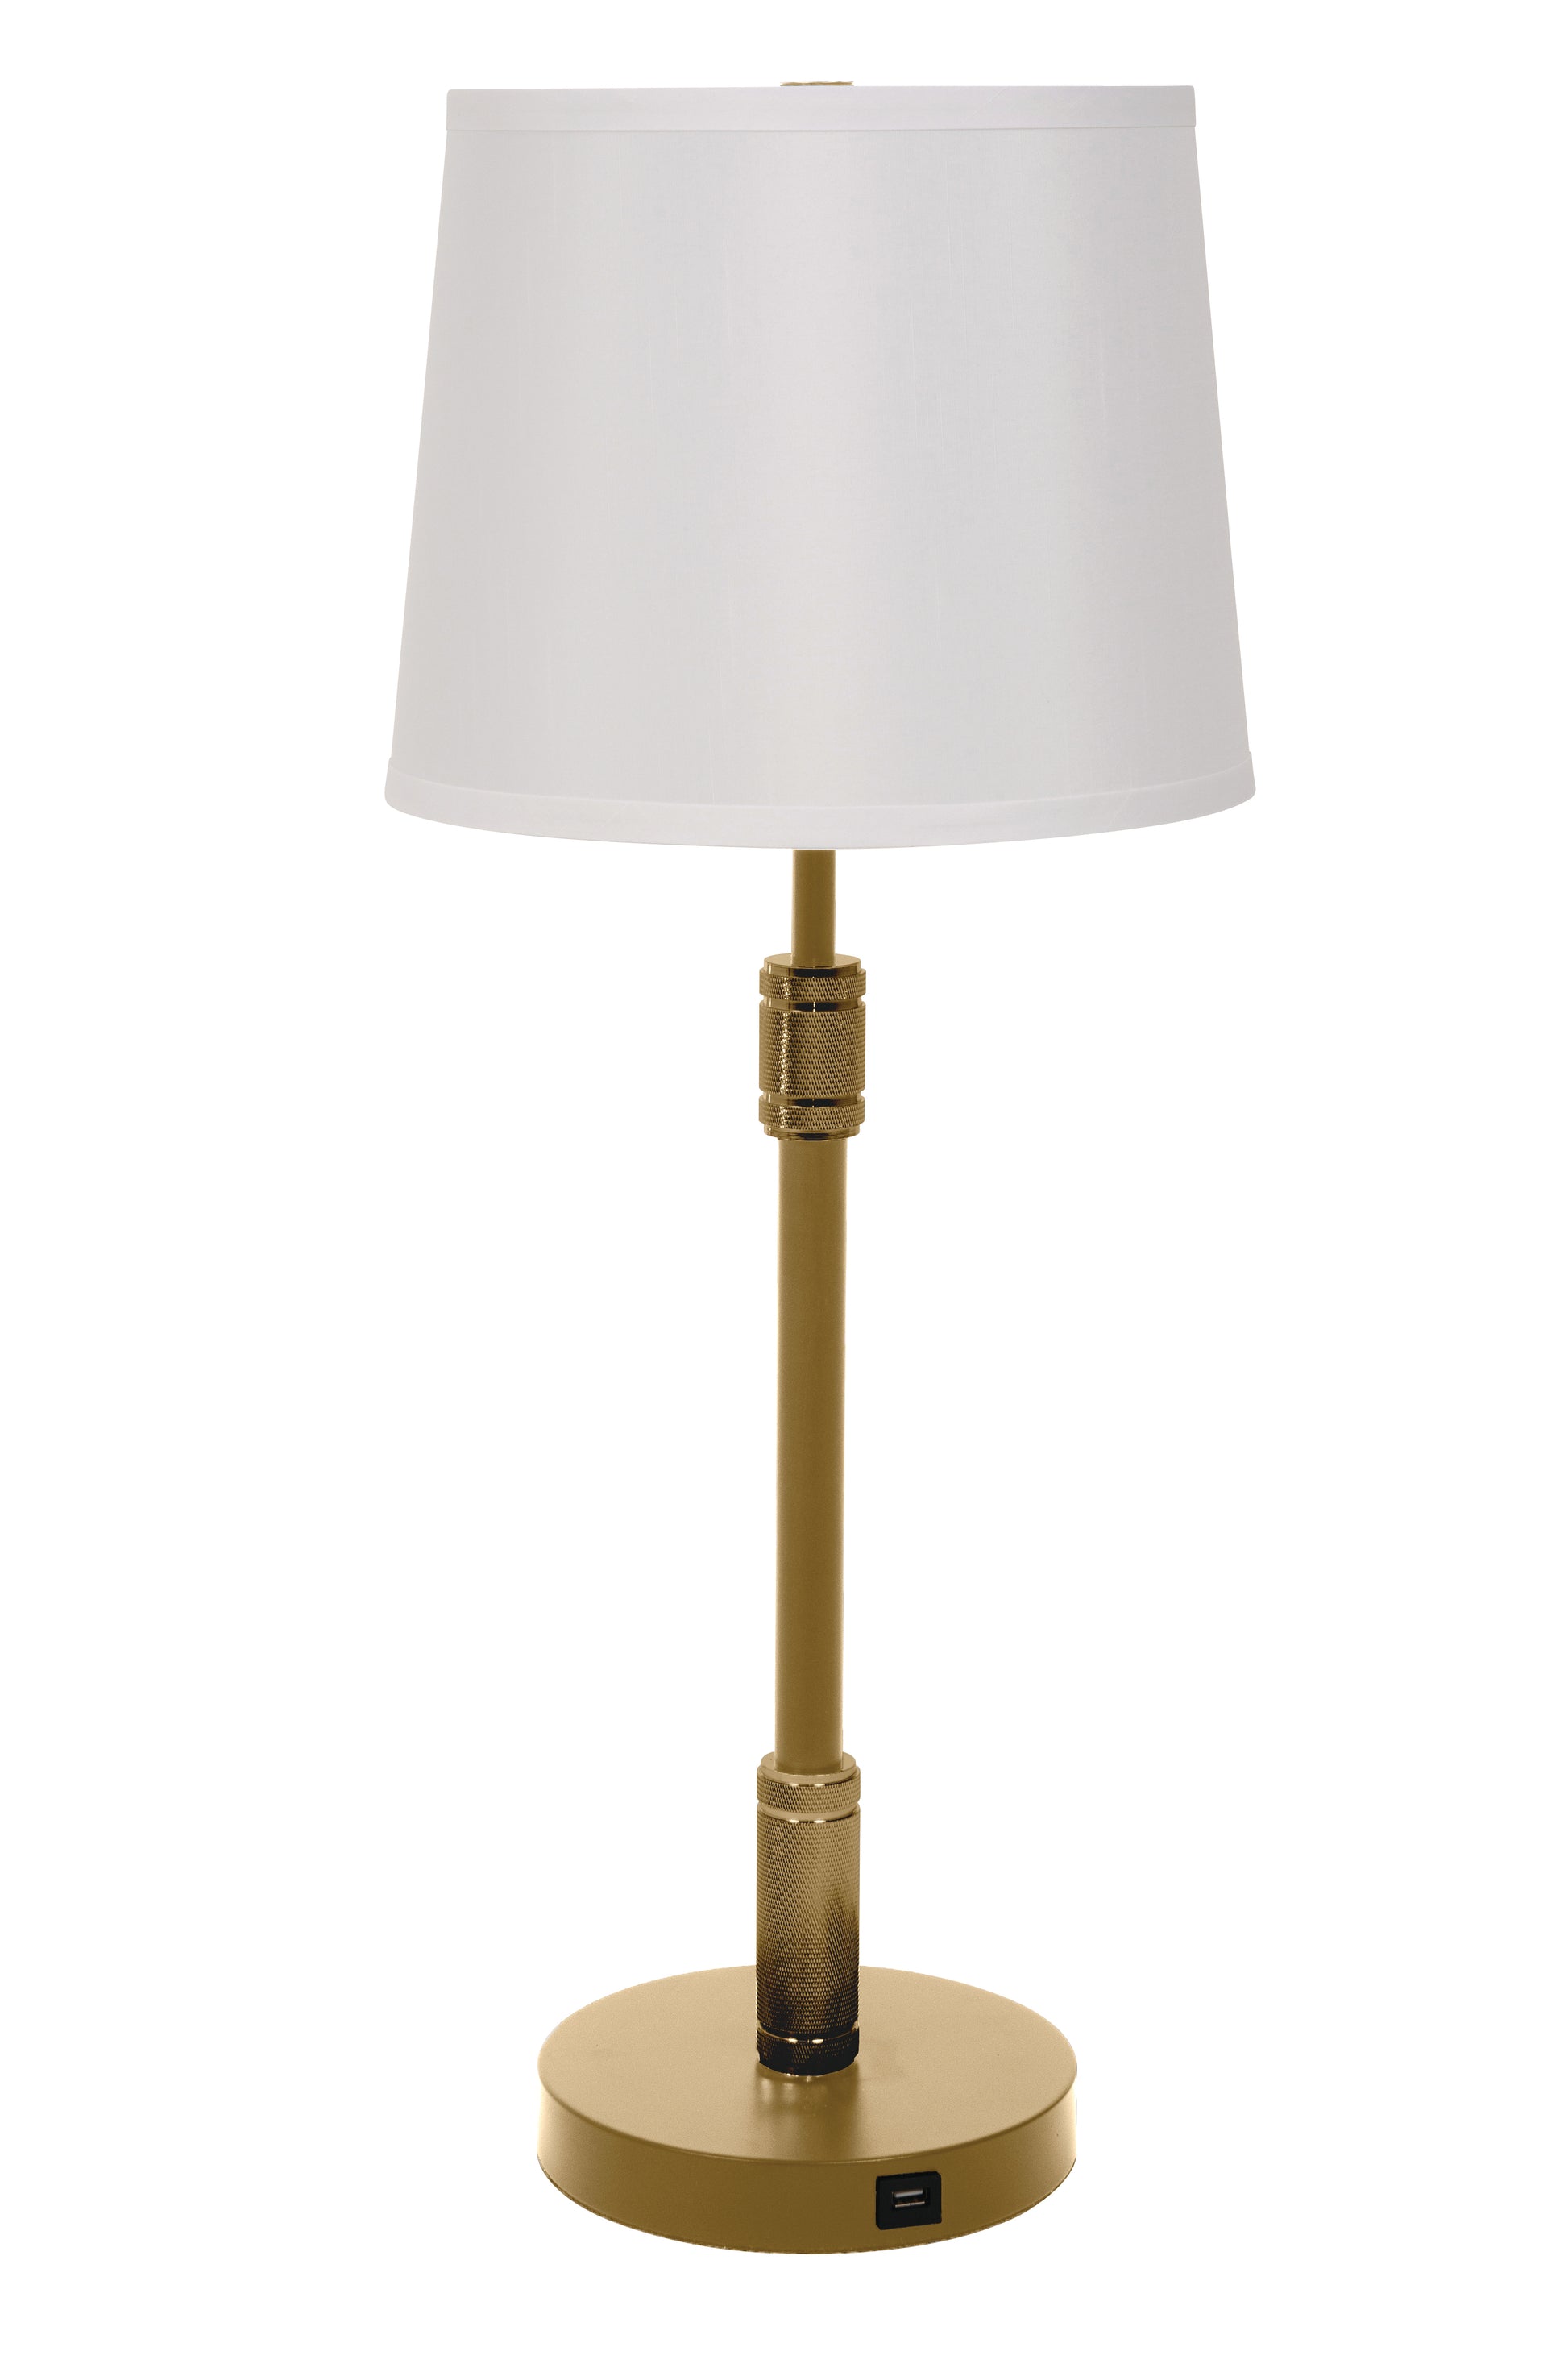 House of Troy Killington Brushed Brass table lamp with USB port and hardback shade KL350-BB